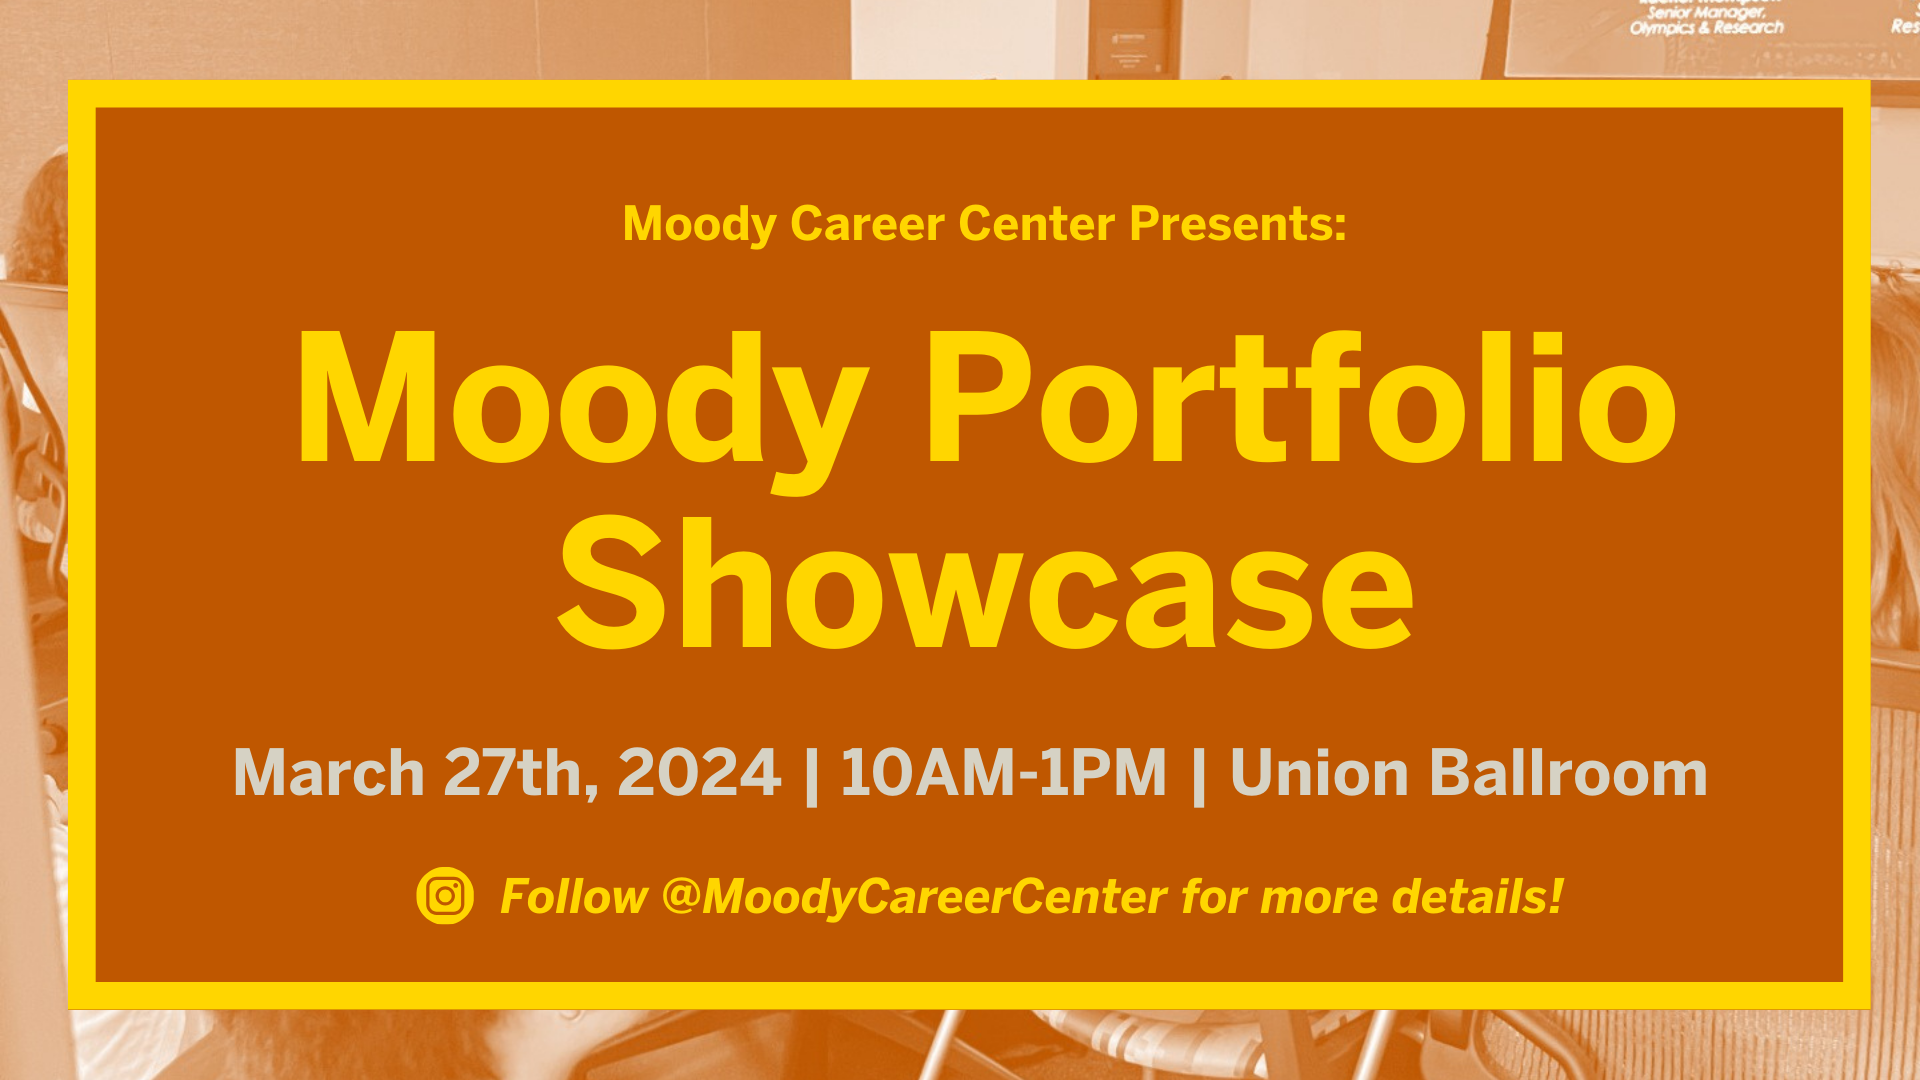 Text says: Moody Portfolio Showcase, March 27th from 10am-1pm in the Union Ballroom